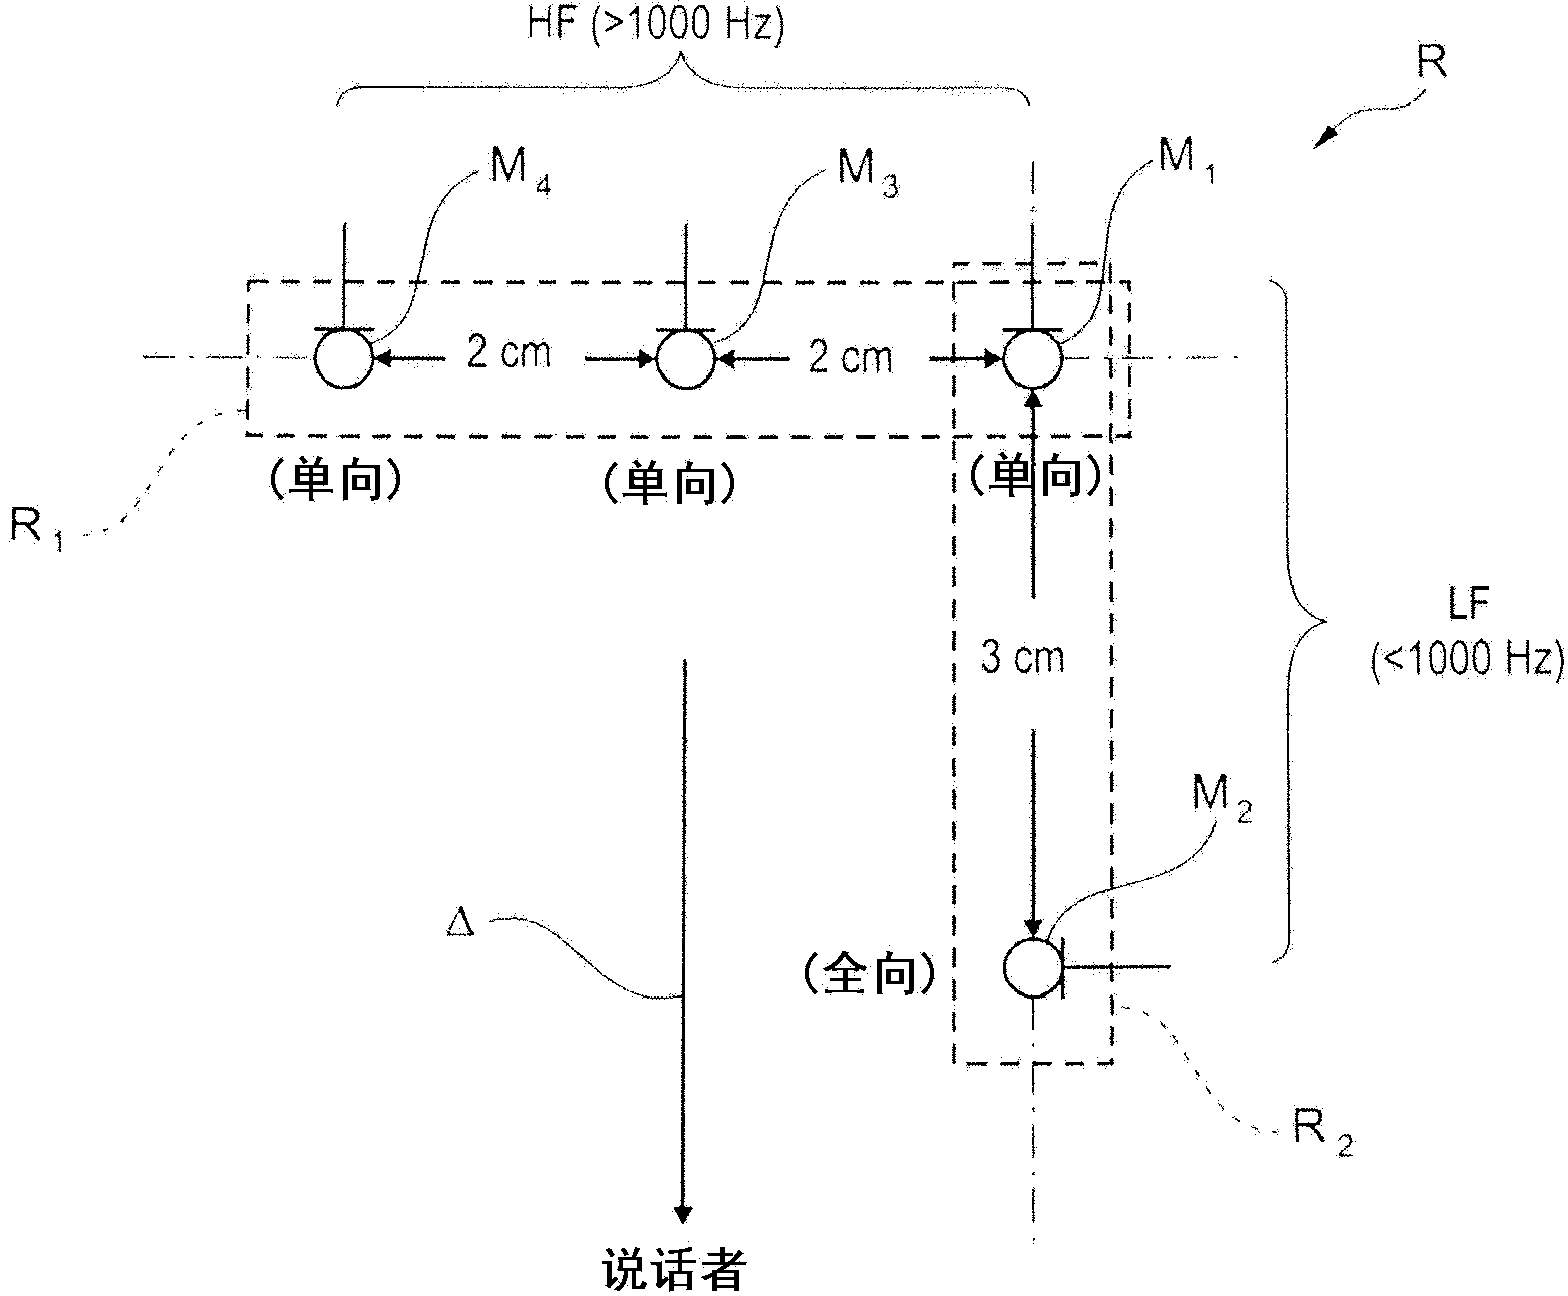 Method for suppressing noise in an acoustic signal for a multi-microphone audio device operating in a noisy environment